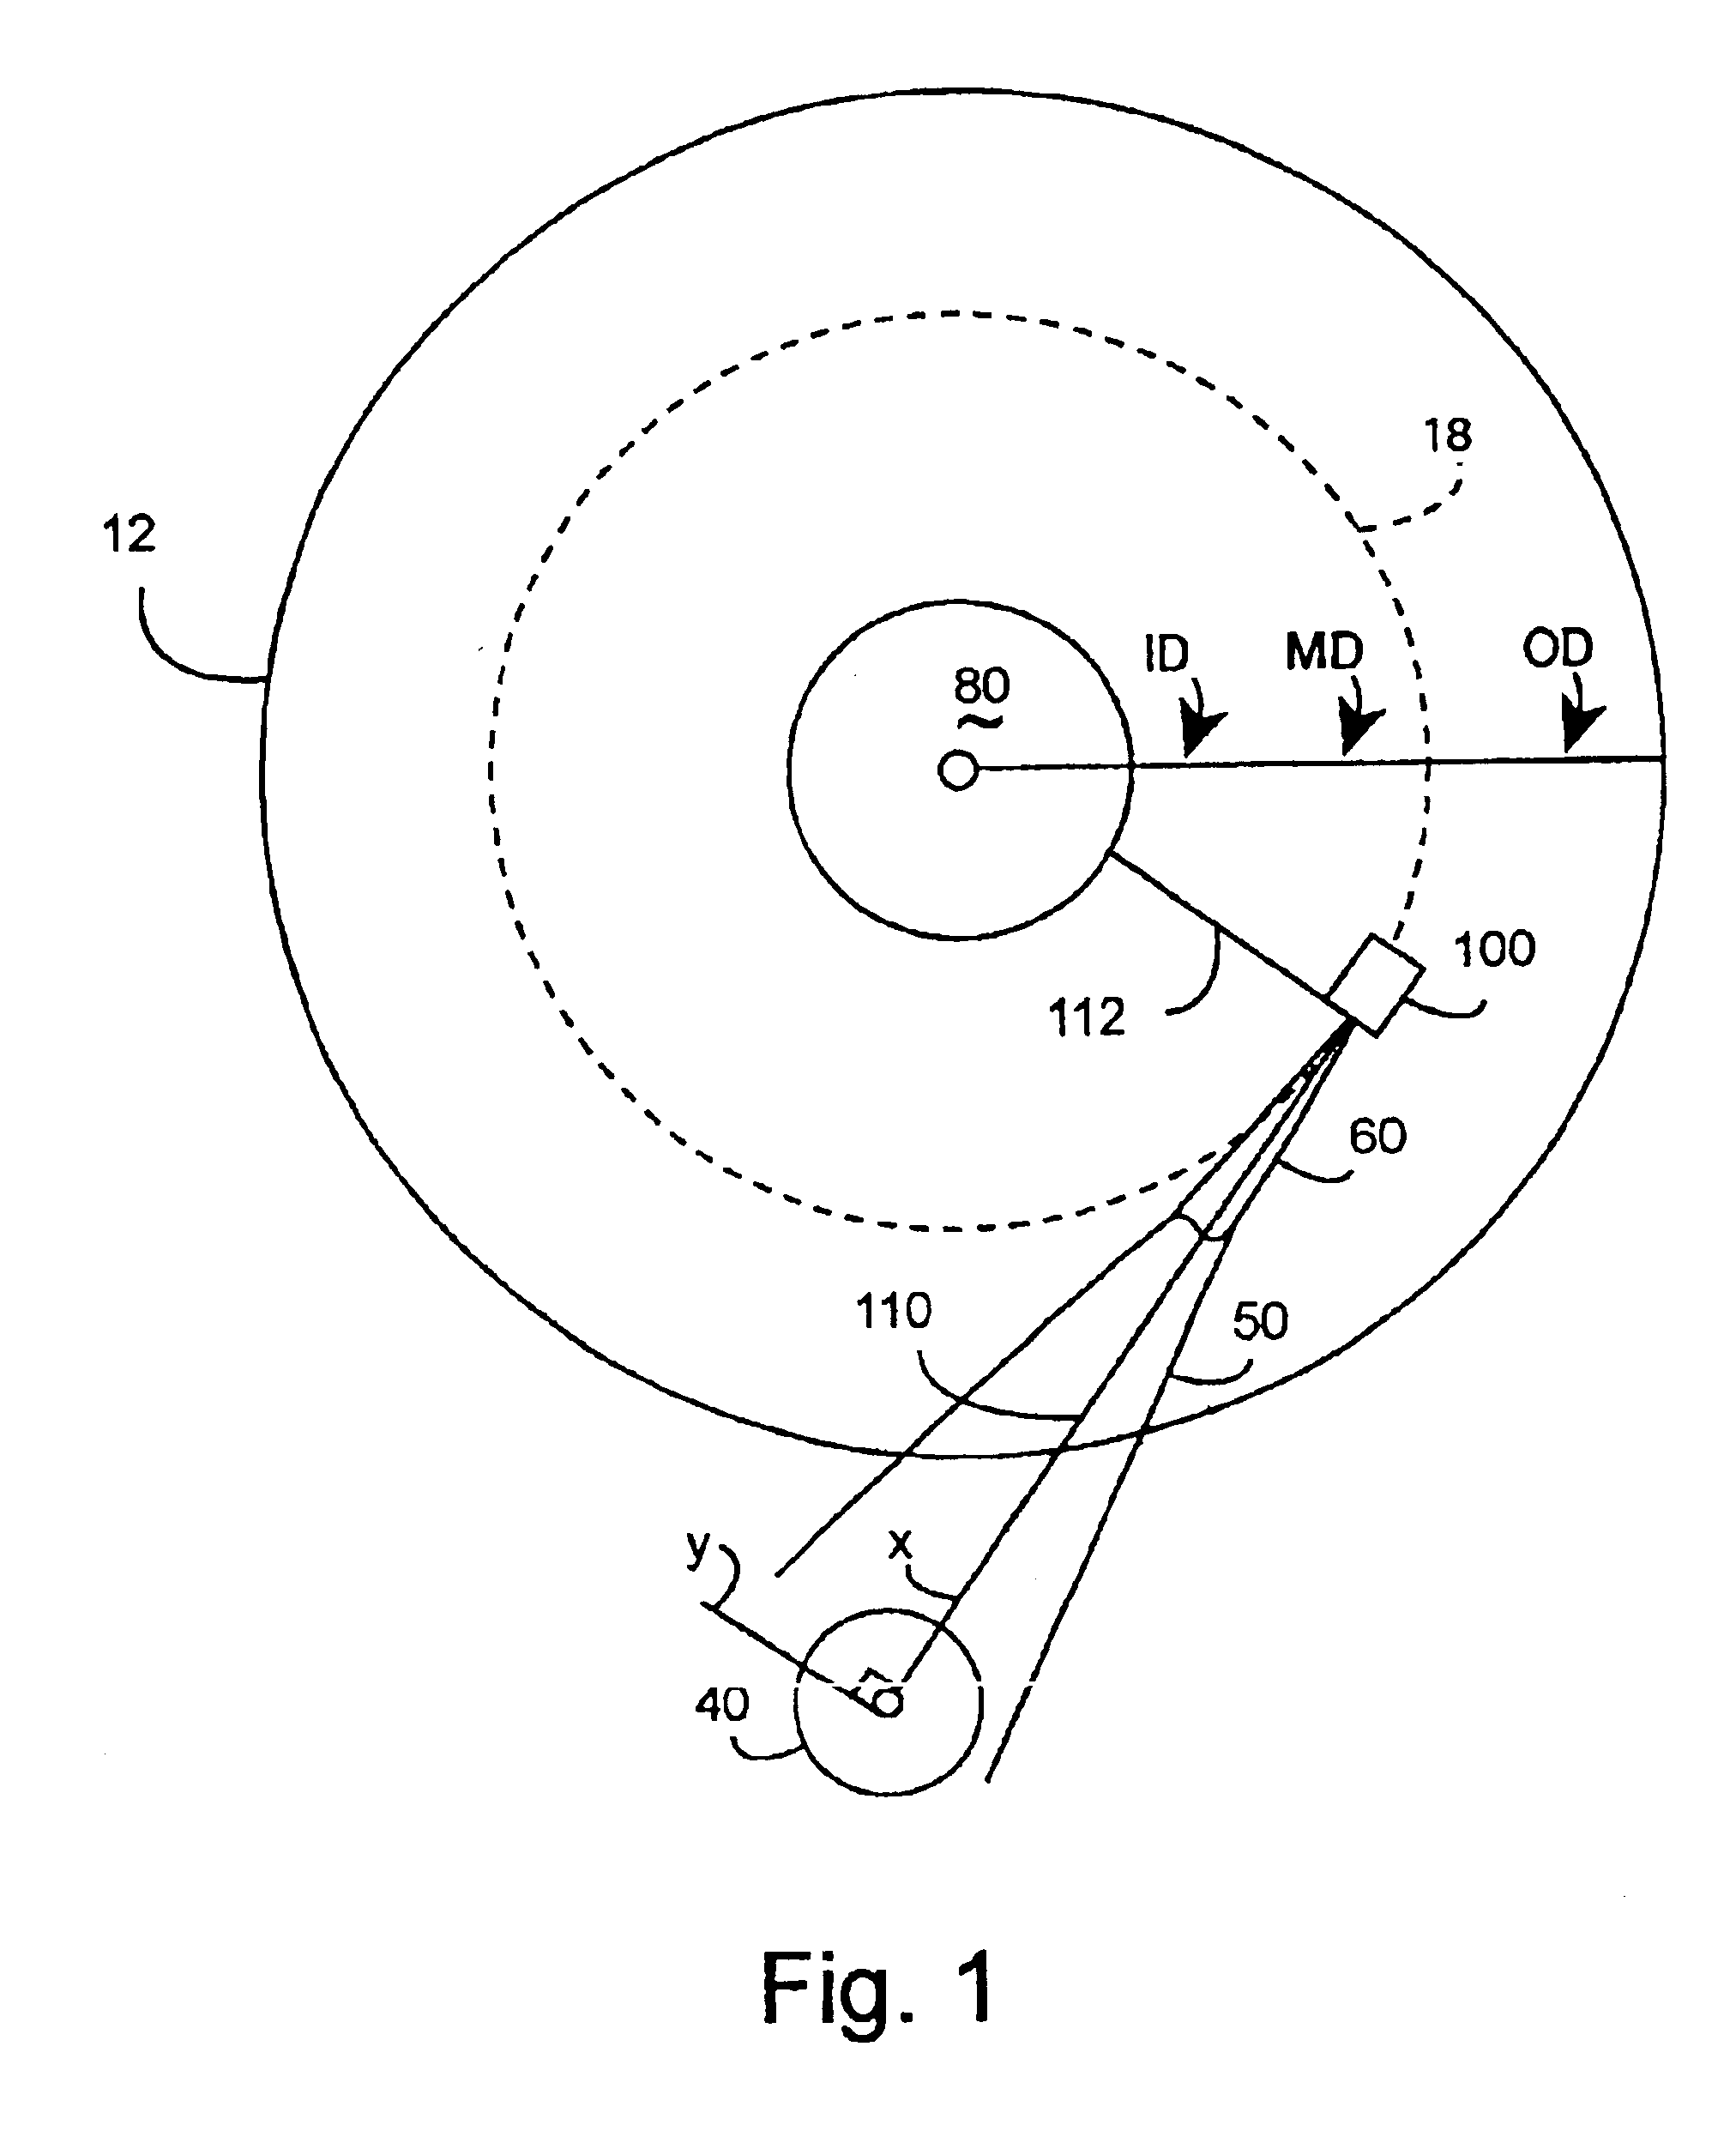 Method and apparatus reducing off-track head motion due to disk vibration in a disk drive through flexure mounting and/or non-symmetric hinging within the head gimbal assembly